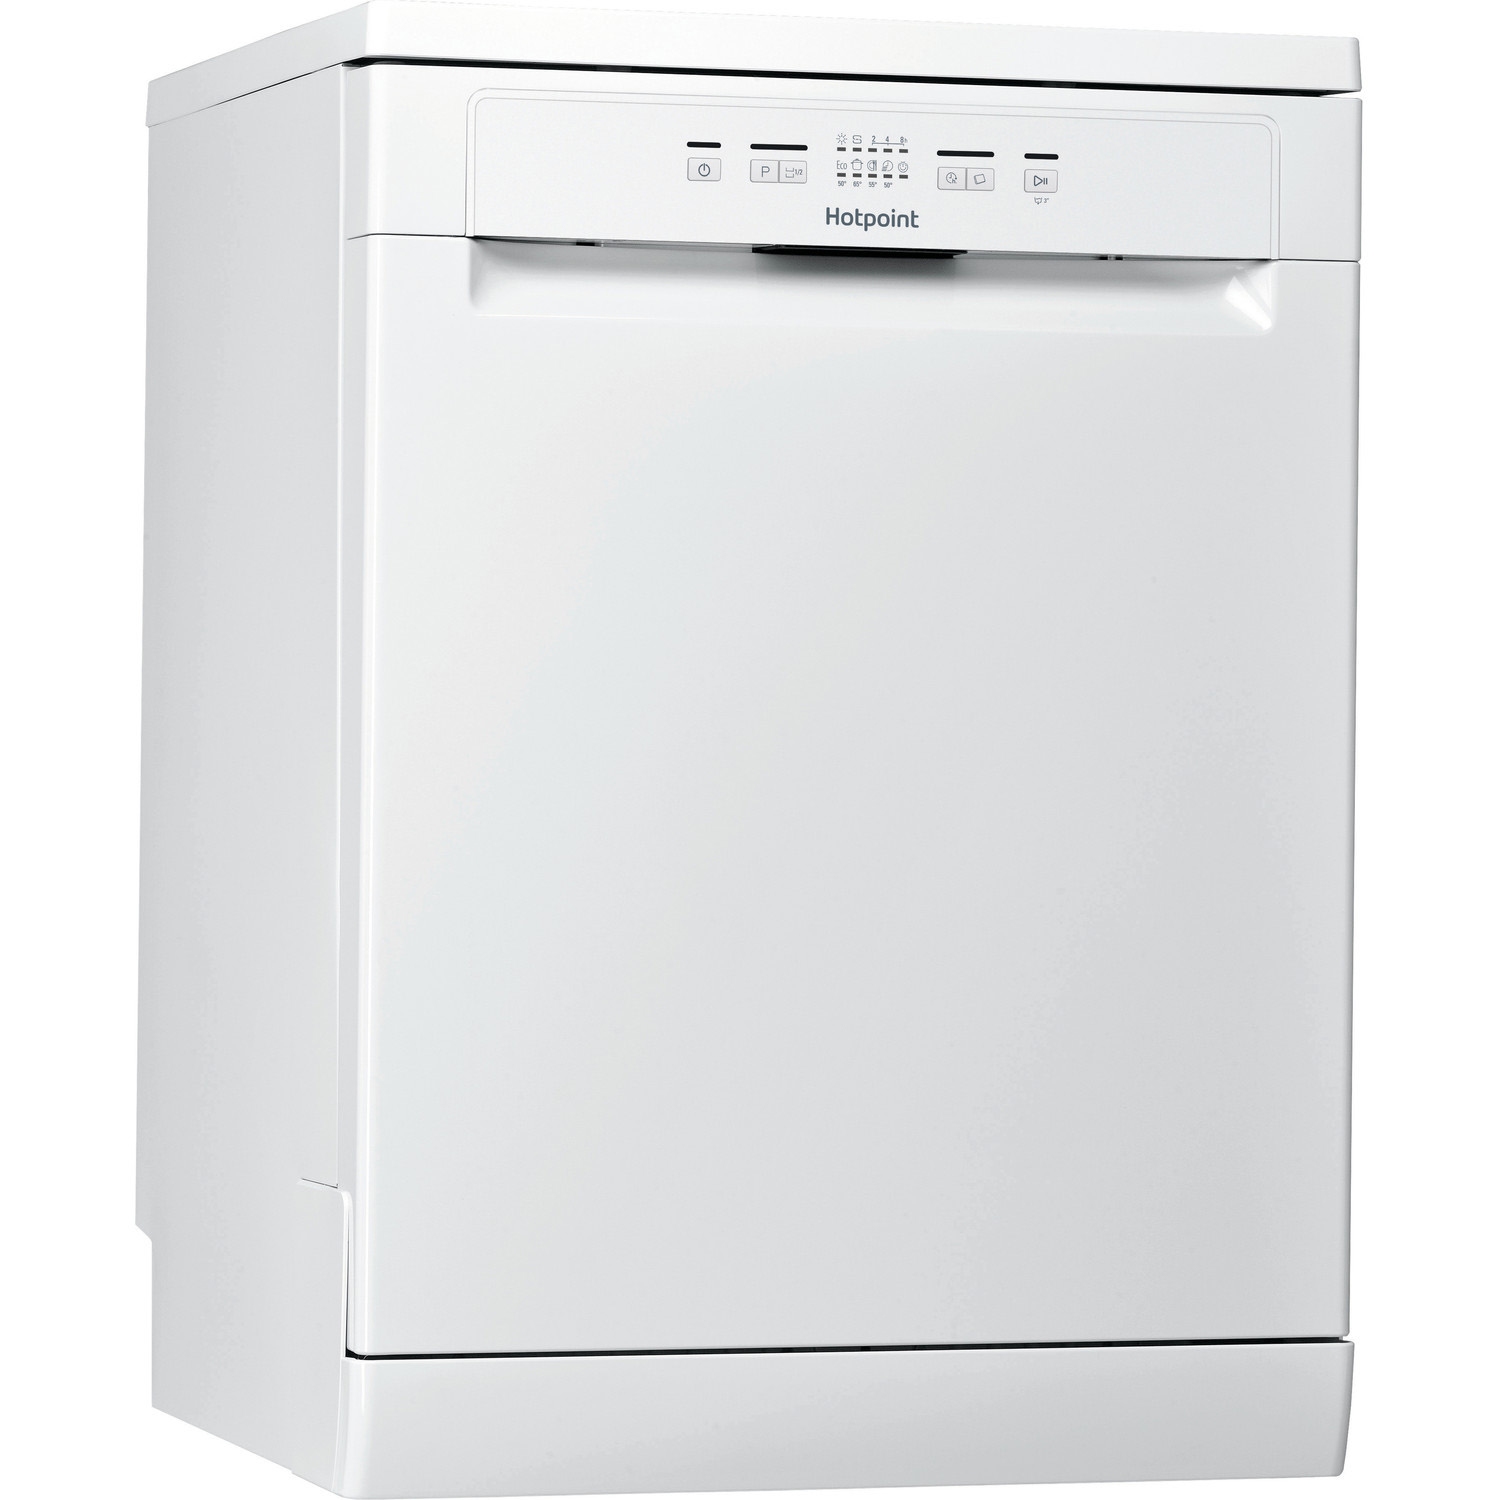 Hotpoint HEFC2B19CUKN Full Size Dishwasher - White - 13 Place Settings - 0